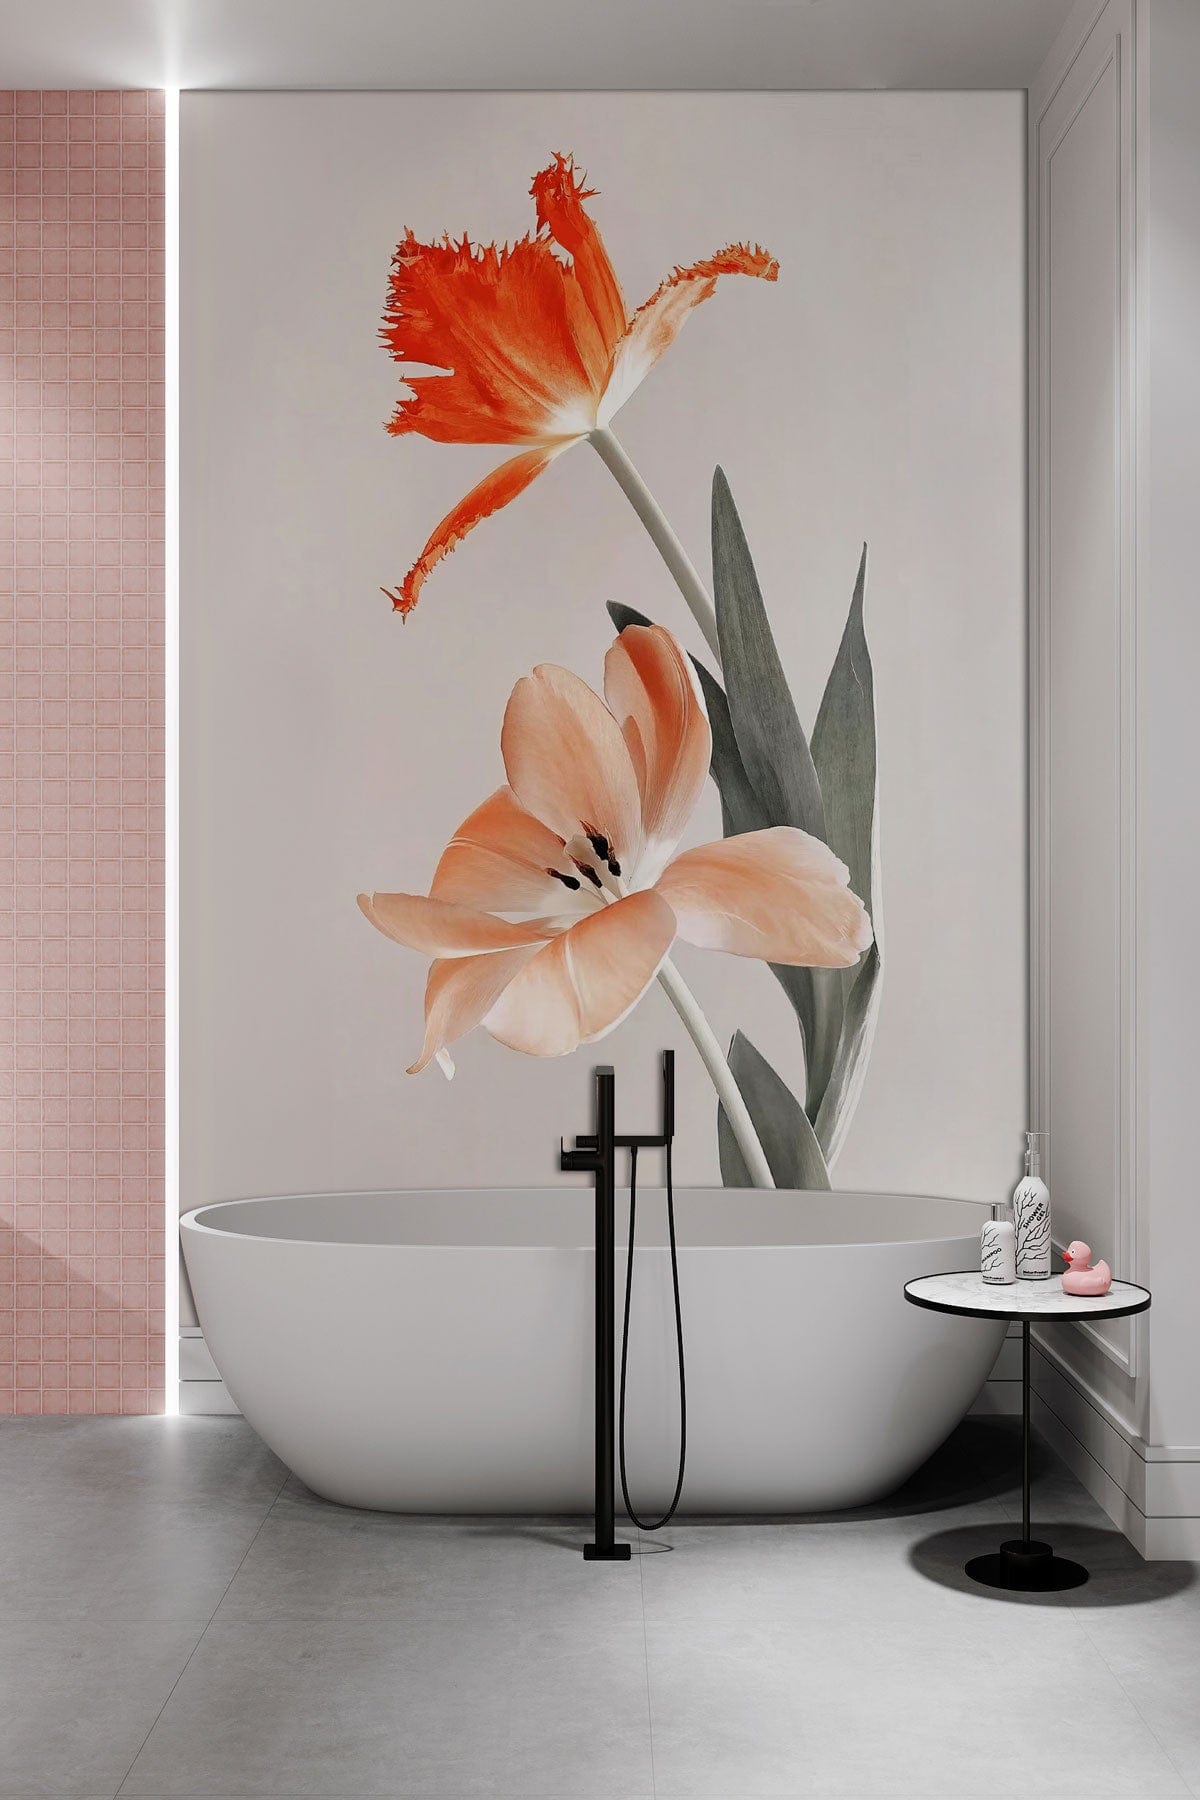 Decorative Wallpaper Mural with Matching Lilies for the Bathroom